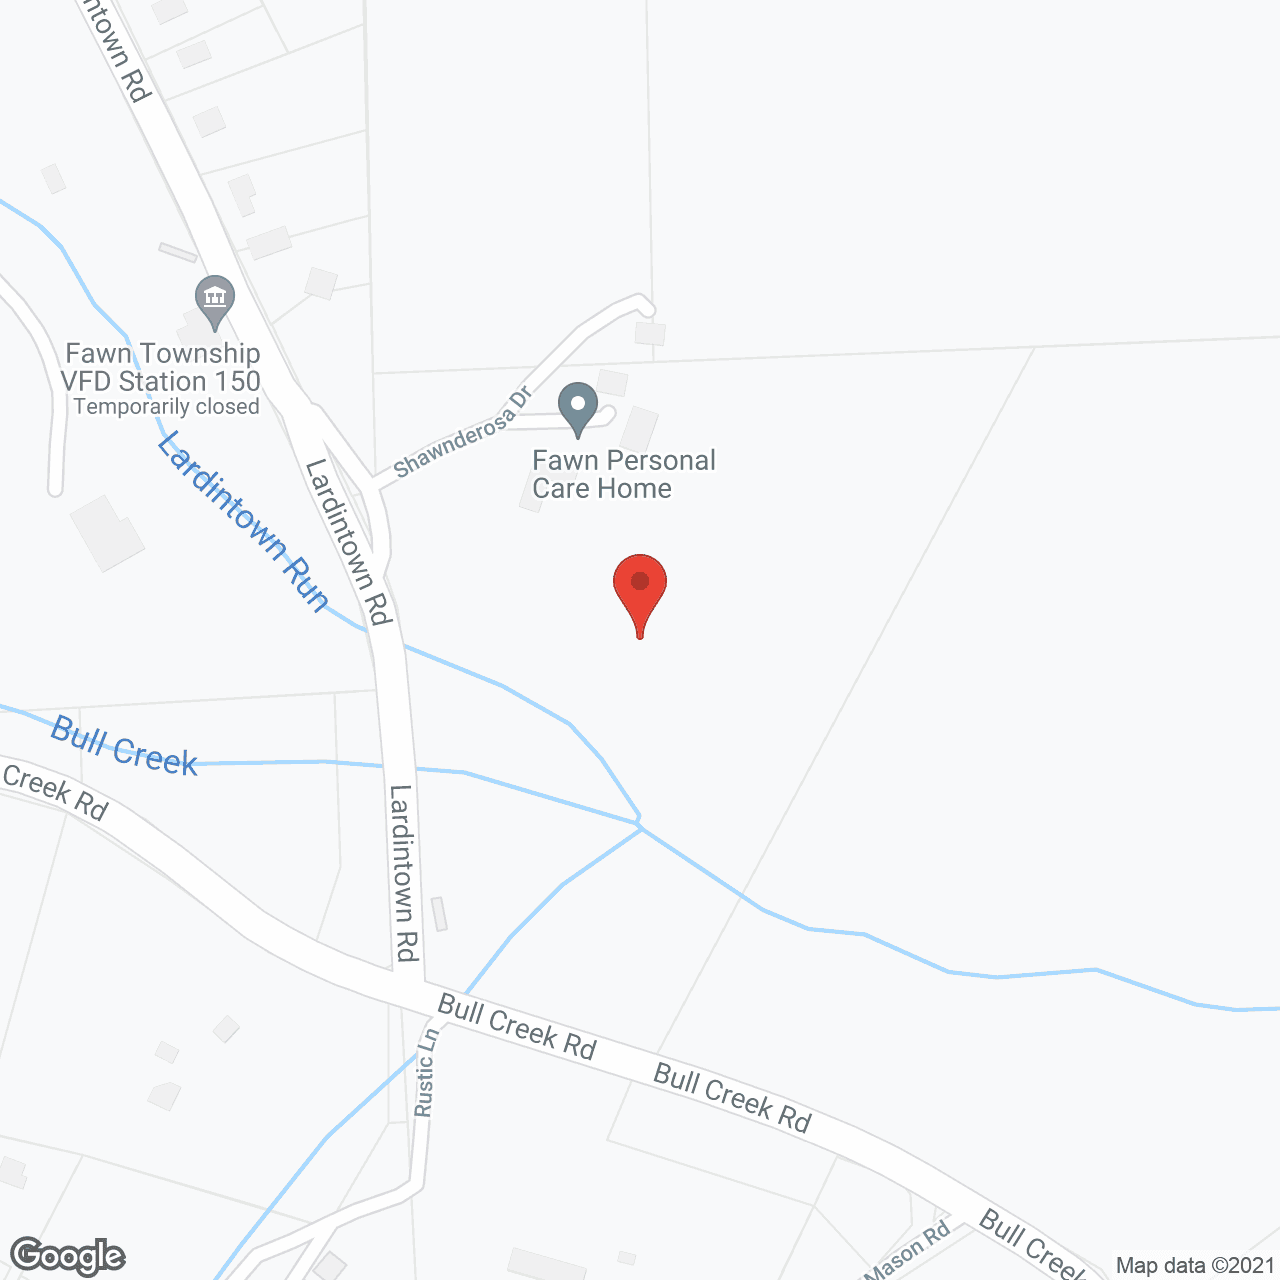 Fawn Personal Care Home in google map